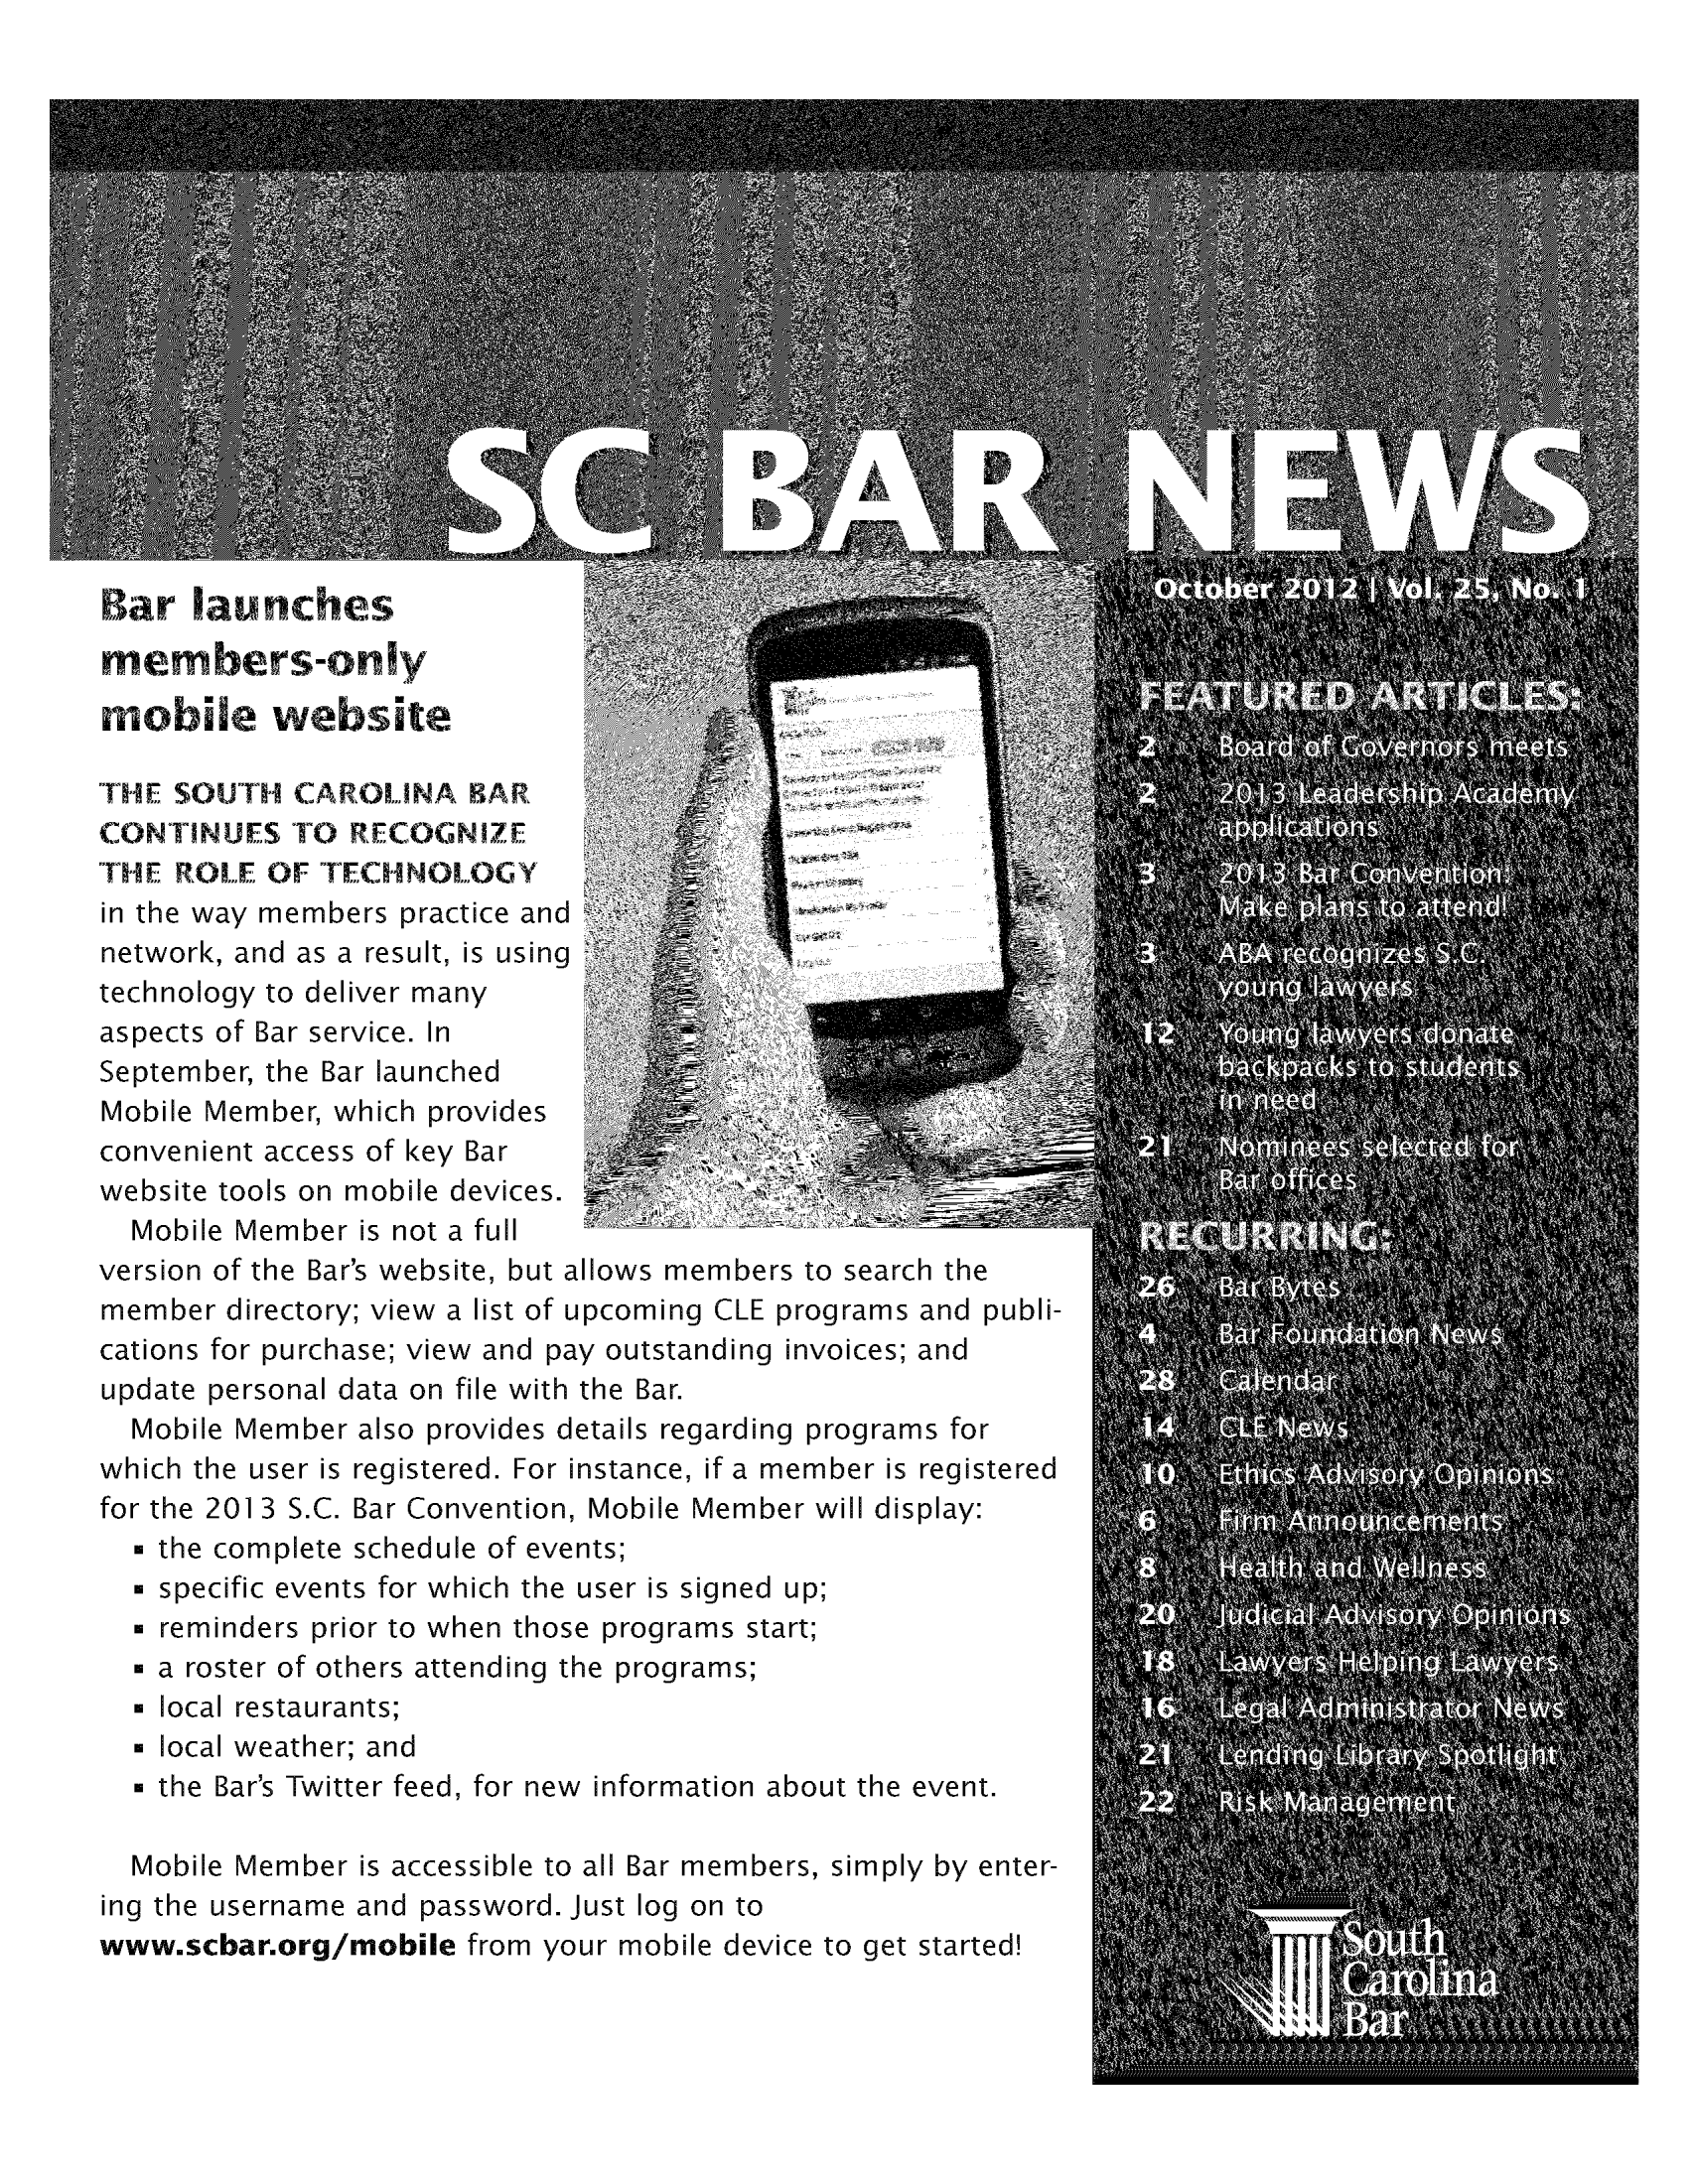 handle is hein.barjournals/socarbn0025 and id is 1 raw text is: Bar launches
members-only
mobile website
THE SOUTH CAROLINA BAR
CONTINUES TO RECOGNIZE
THE ROLE OF TECHNOLOGY
in the way members practice and
network, and as a result, is using
technology to deliver many
aspects of Bar service. In
September, the Bar launched
Mobile Member, which provides
convenient access of key Bar
website tools on mobile devices.
Mobile Member is not a full
version of the Bar's website, but allows members to search the
member directory; view a list of upcoming CLE programs and publi-
cations for purchase; view and pay outstanding invoices; and
update personal data on file with the Bar.
Mobile Member also provides details regarding programs for
which the user is registered. For instance, if a member is registered
for the 201 3 S.C. Bar Convention, Mobile Member will display:
* the complete schedule of events;
* specific events for which the user is signed up;
* reminders prior to when those programs start;
* a roster of others attending the programs;
 local restaurants;
 local weather; and
 the Bar's Twitter feed, for new information about the event.
Mobile Member is accessible to all Bar members, simply by enter-
ing the username and password. Just log on to
www.scbar.org/mobile from your mobile device to get started!


